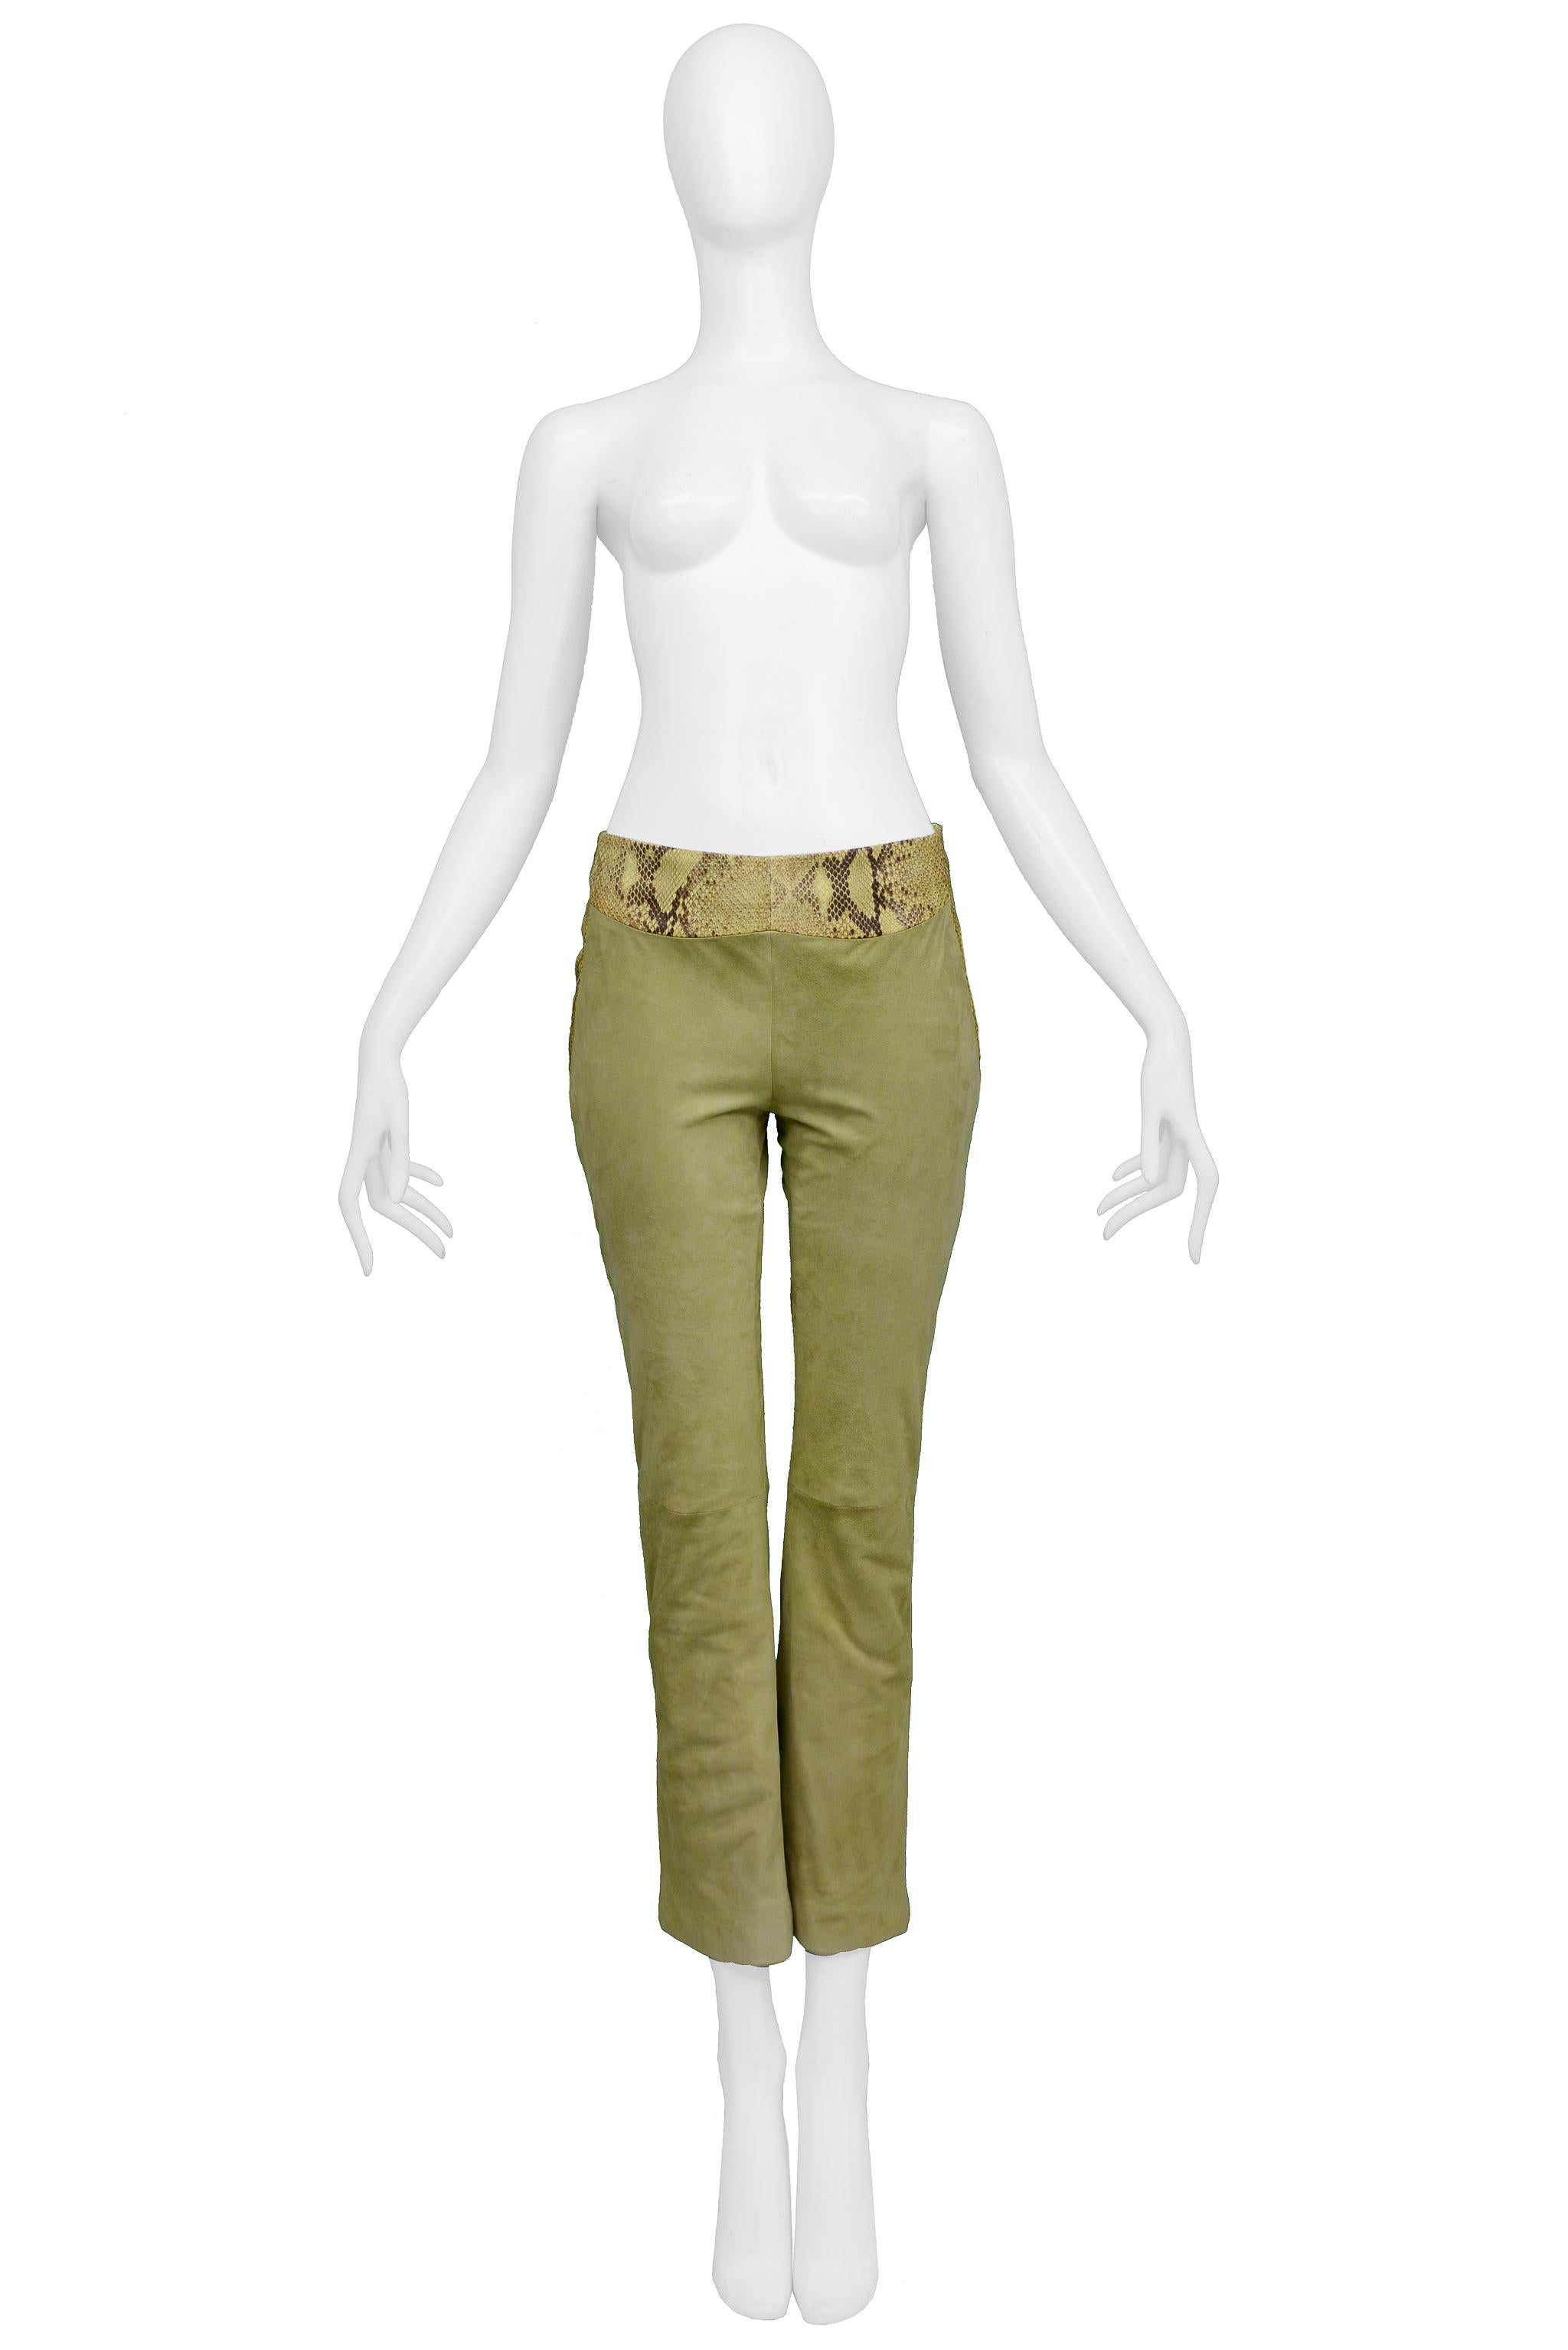 Resurrection Vintage is excited to offer a pair of vintage Versace light green suede leather pants featuring a high-waist, slim fit, skinny legs, contrasting leather waistband, lining, and side zipper. 

Versace
Size 40
100% Leather  
Lining Acetate